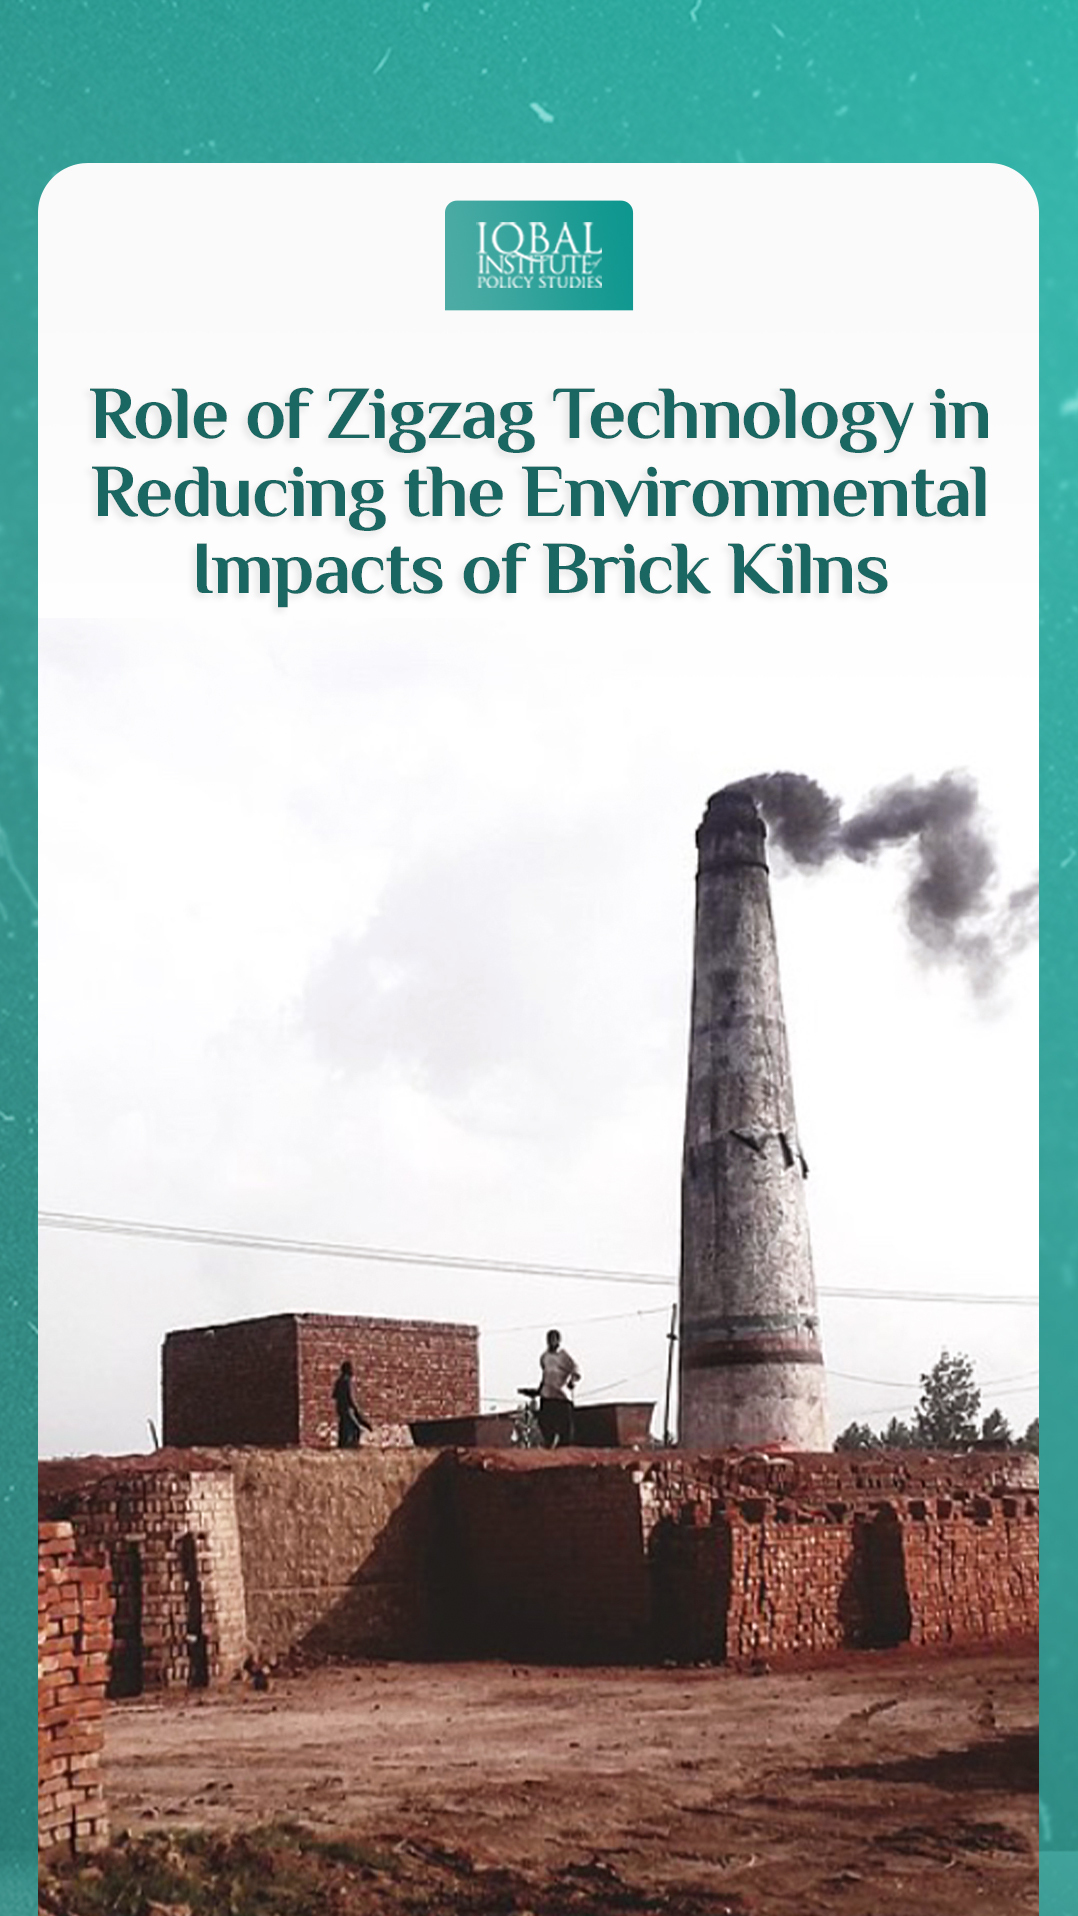 Role of Zigzag Technology in Reducing the Environmental Impacts of Brick Kilns